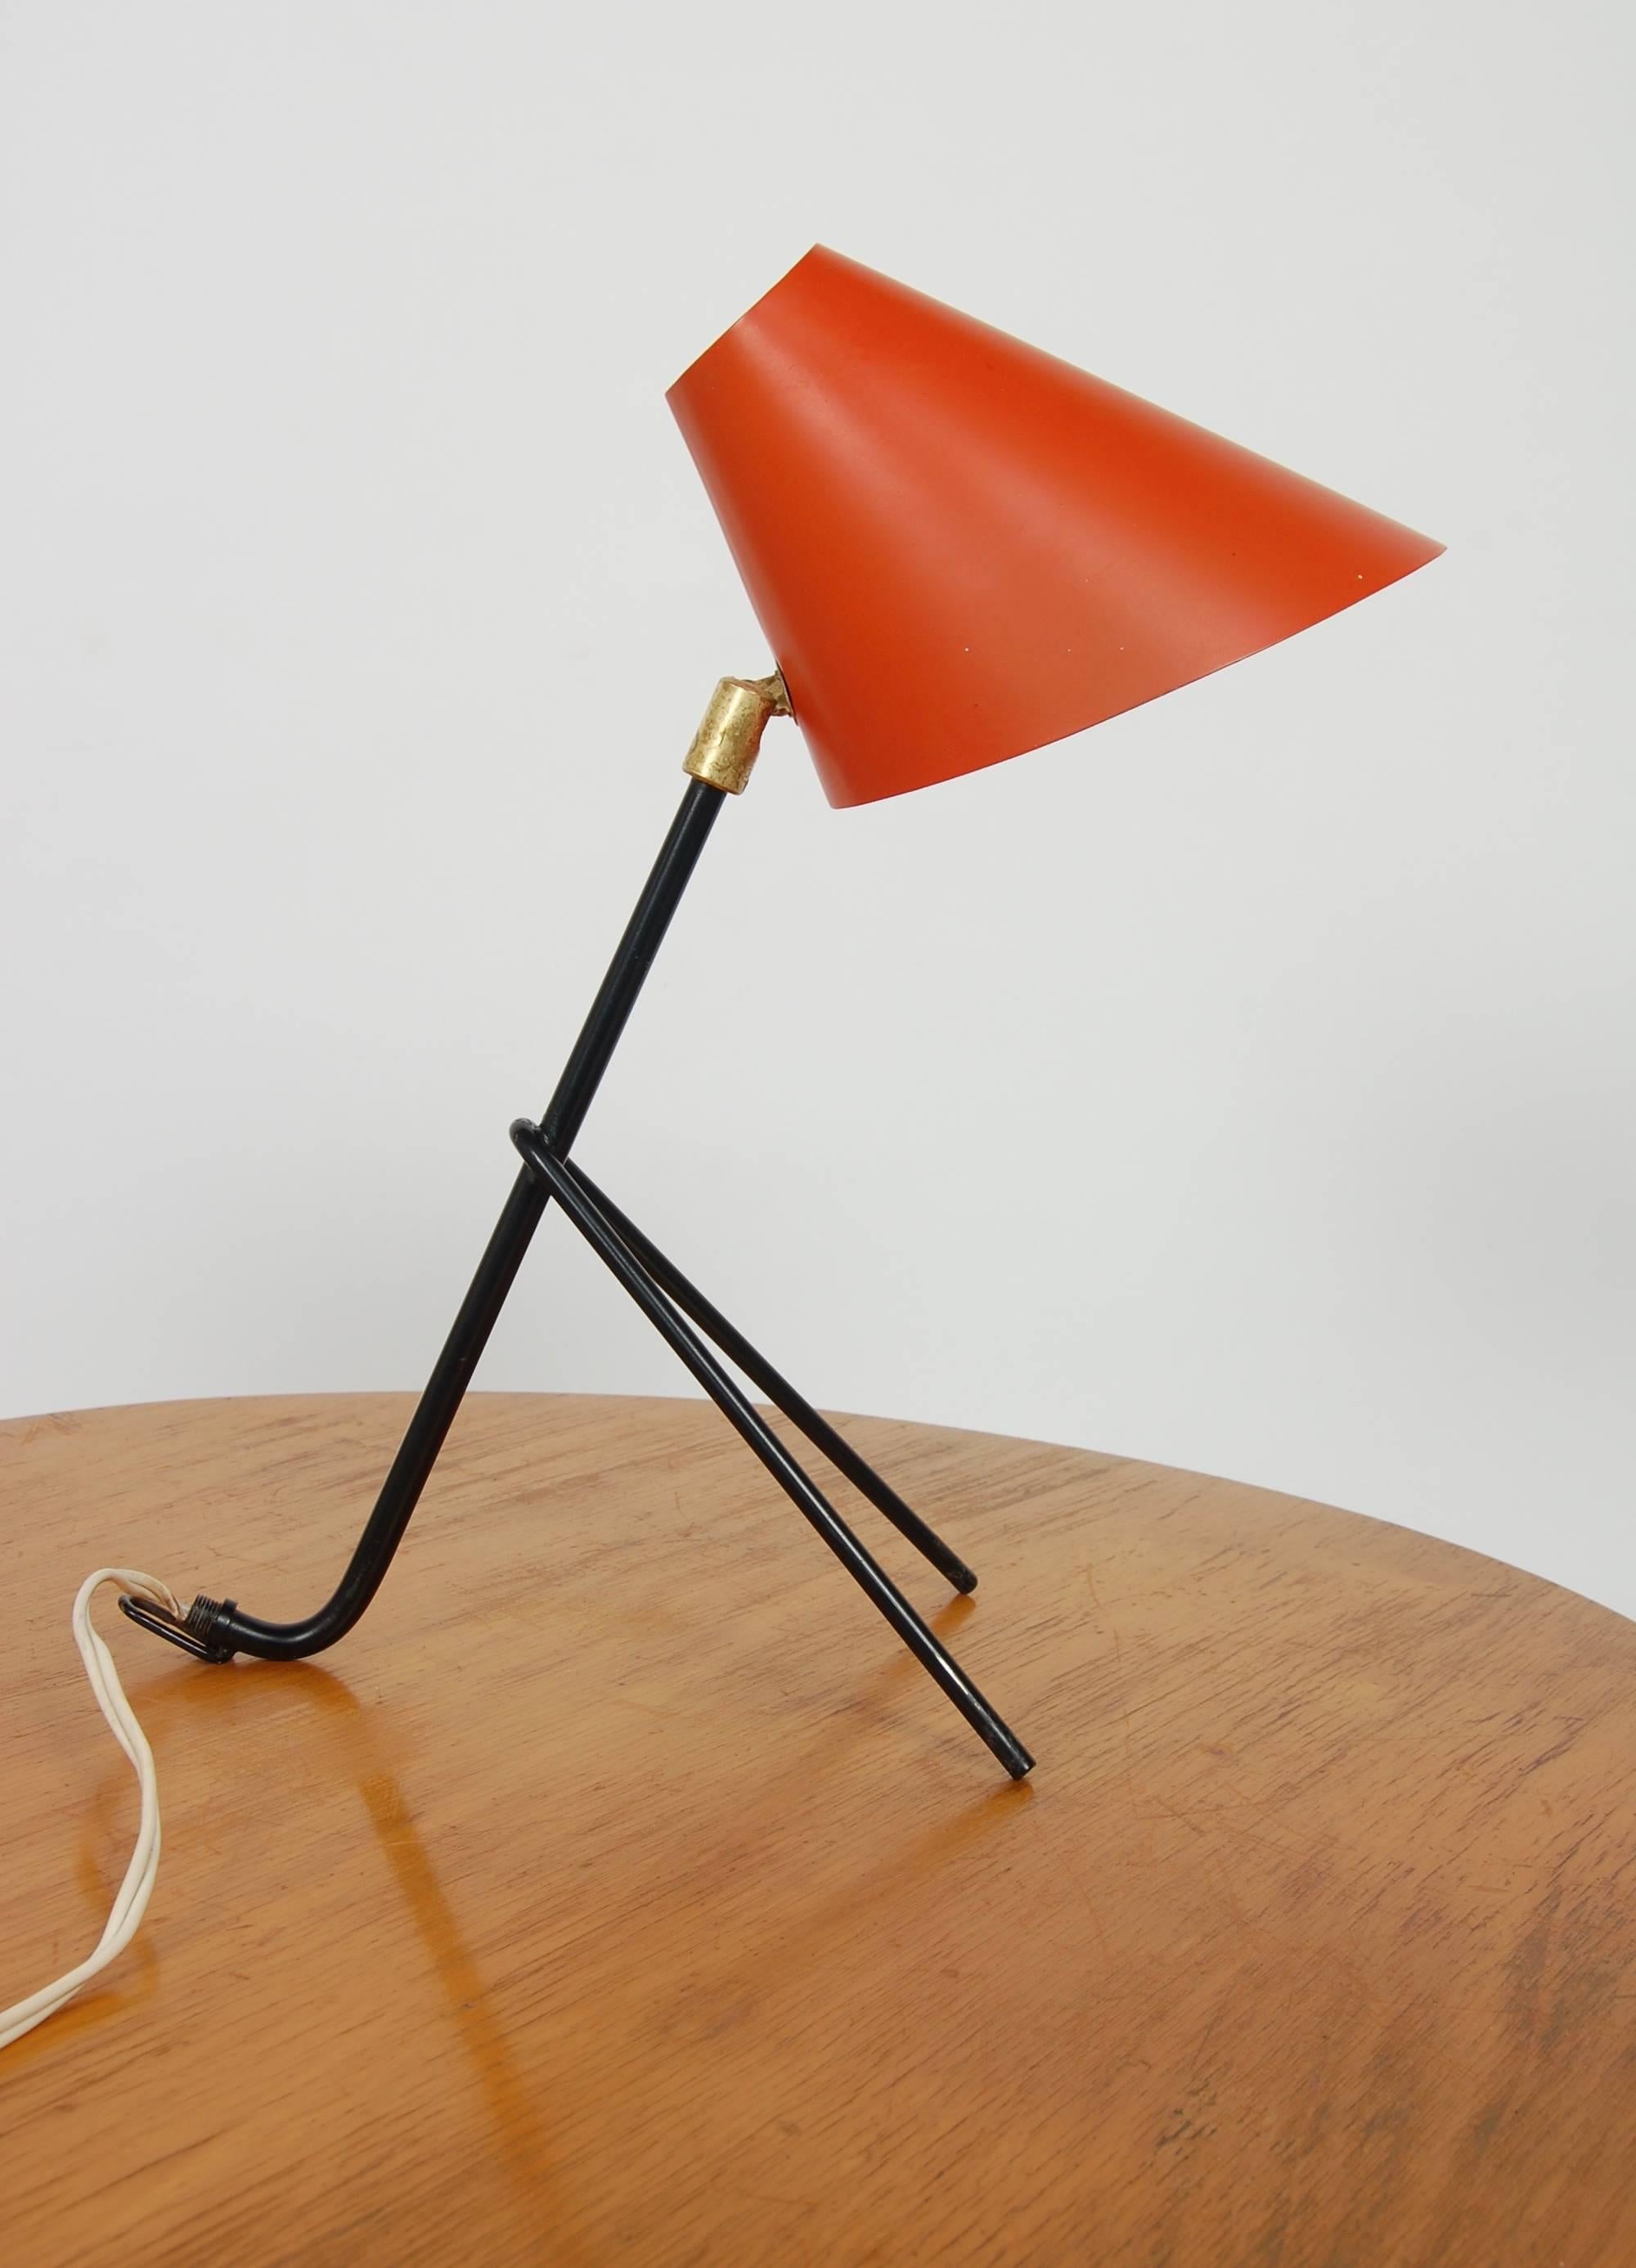 Hang-All table or wall lamp by Bergboms of Sweden, red adjustable shade on a tripod base.